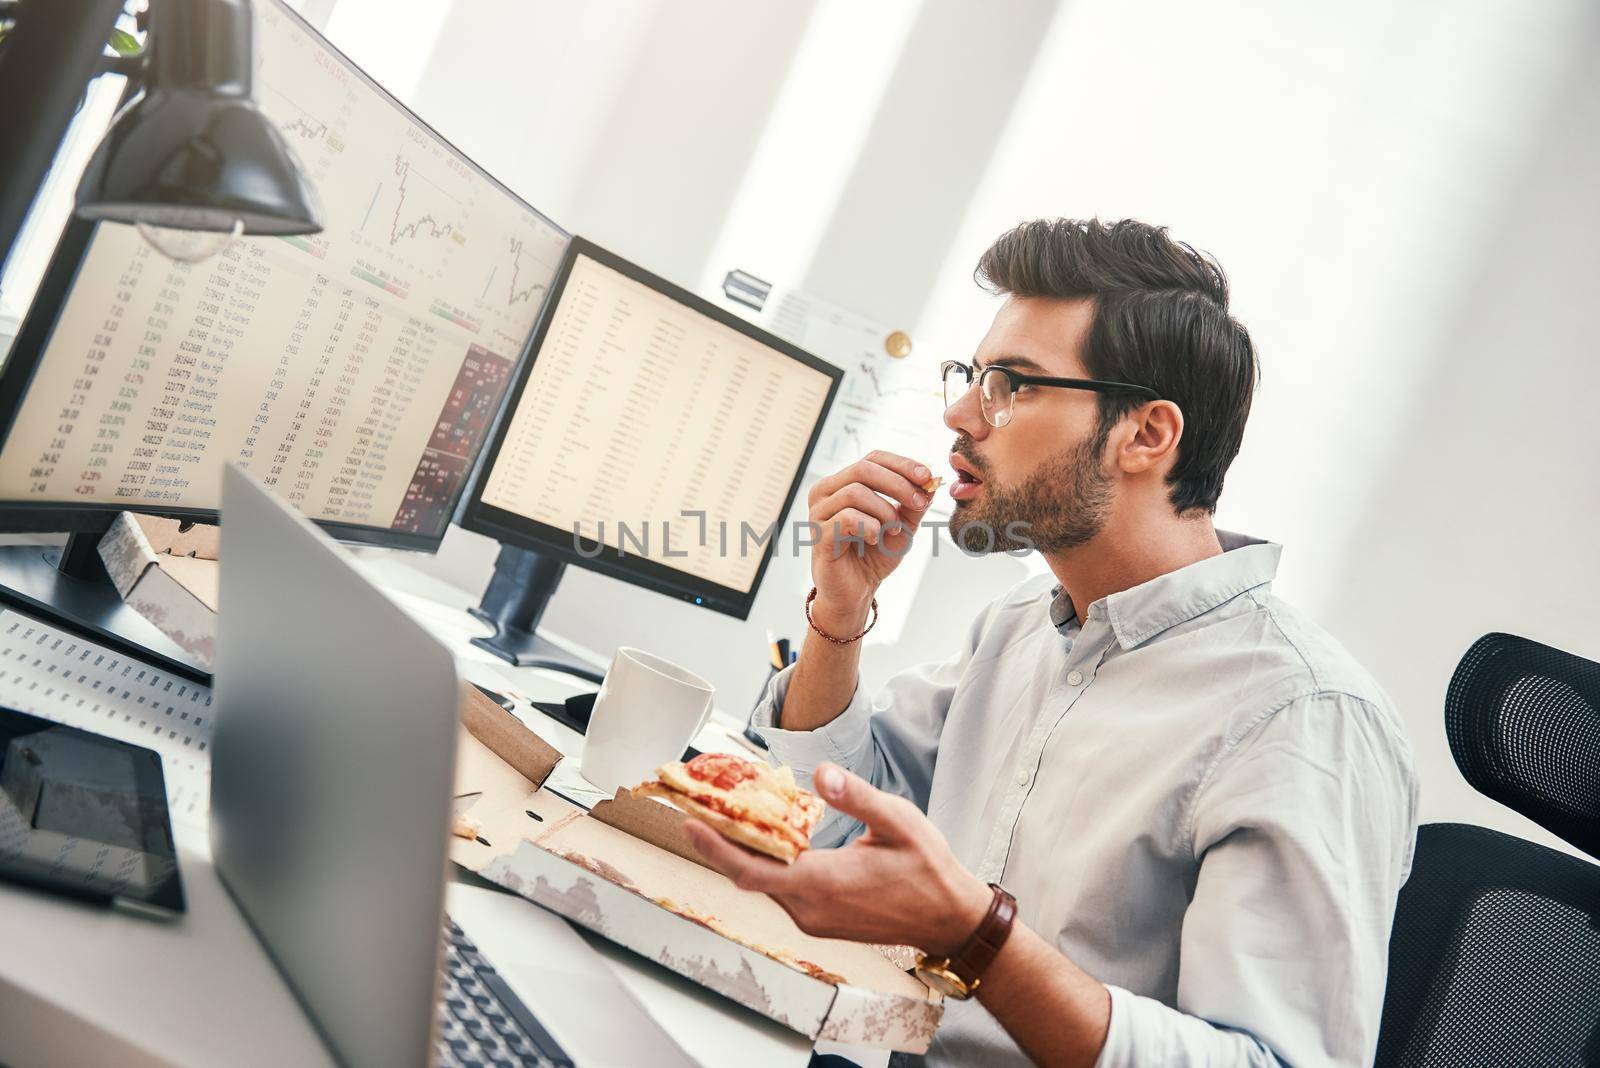 It can not be truth Disappointed young trader is looking at monitor screen with trading charts and financial data while eating hot pizza in his modern office. Food concept. Business concept. Trade concept. Bad news